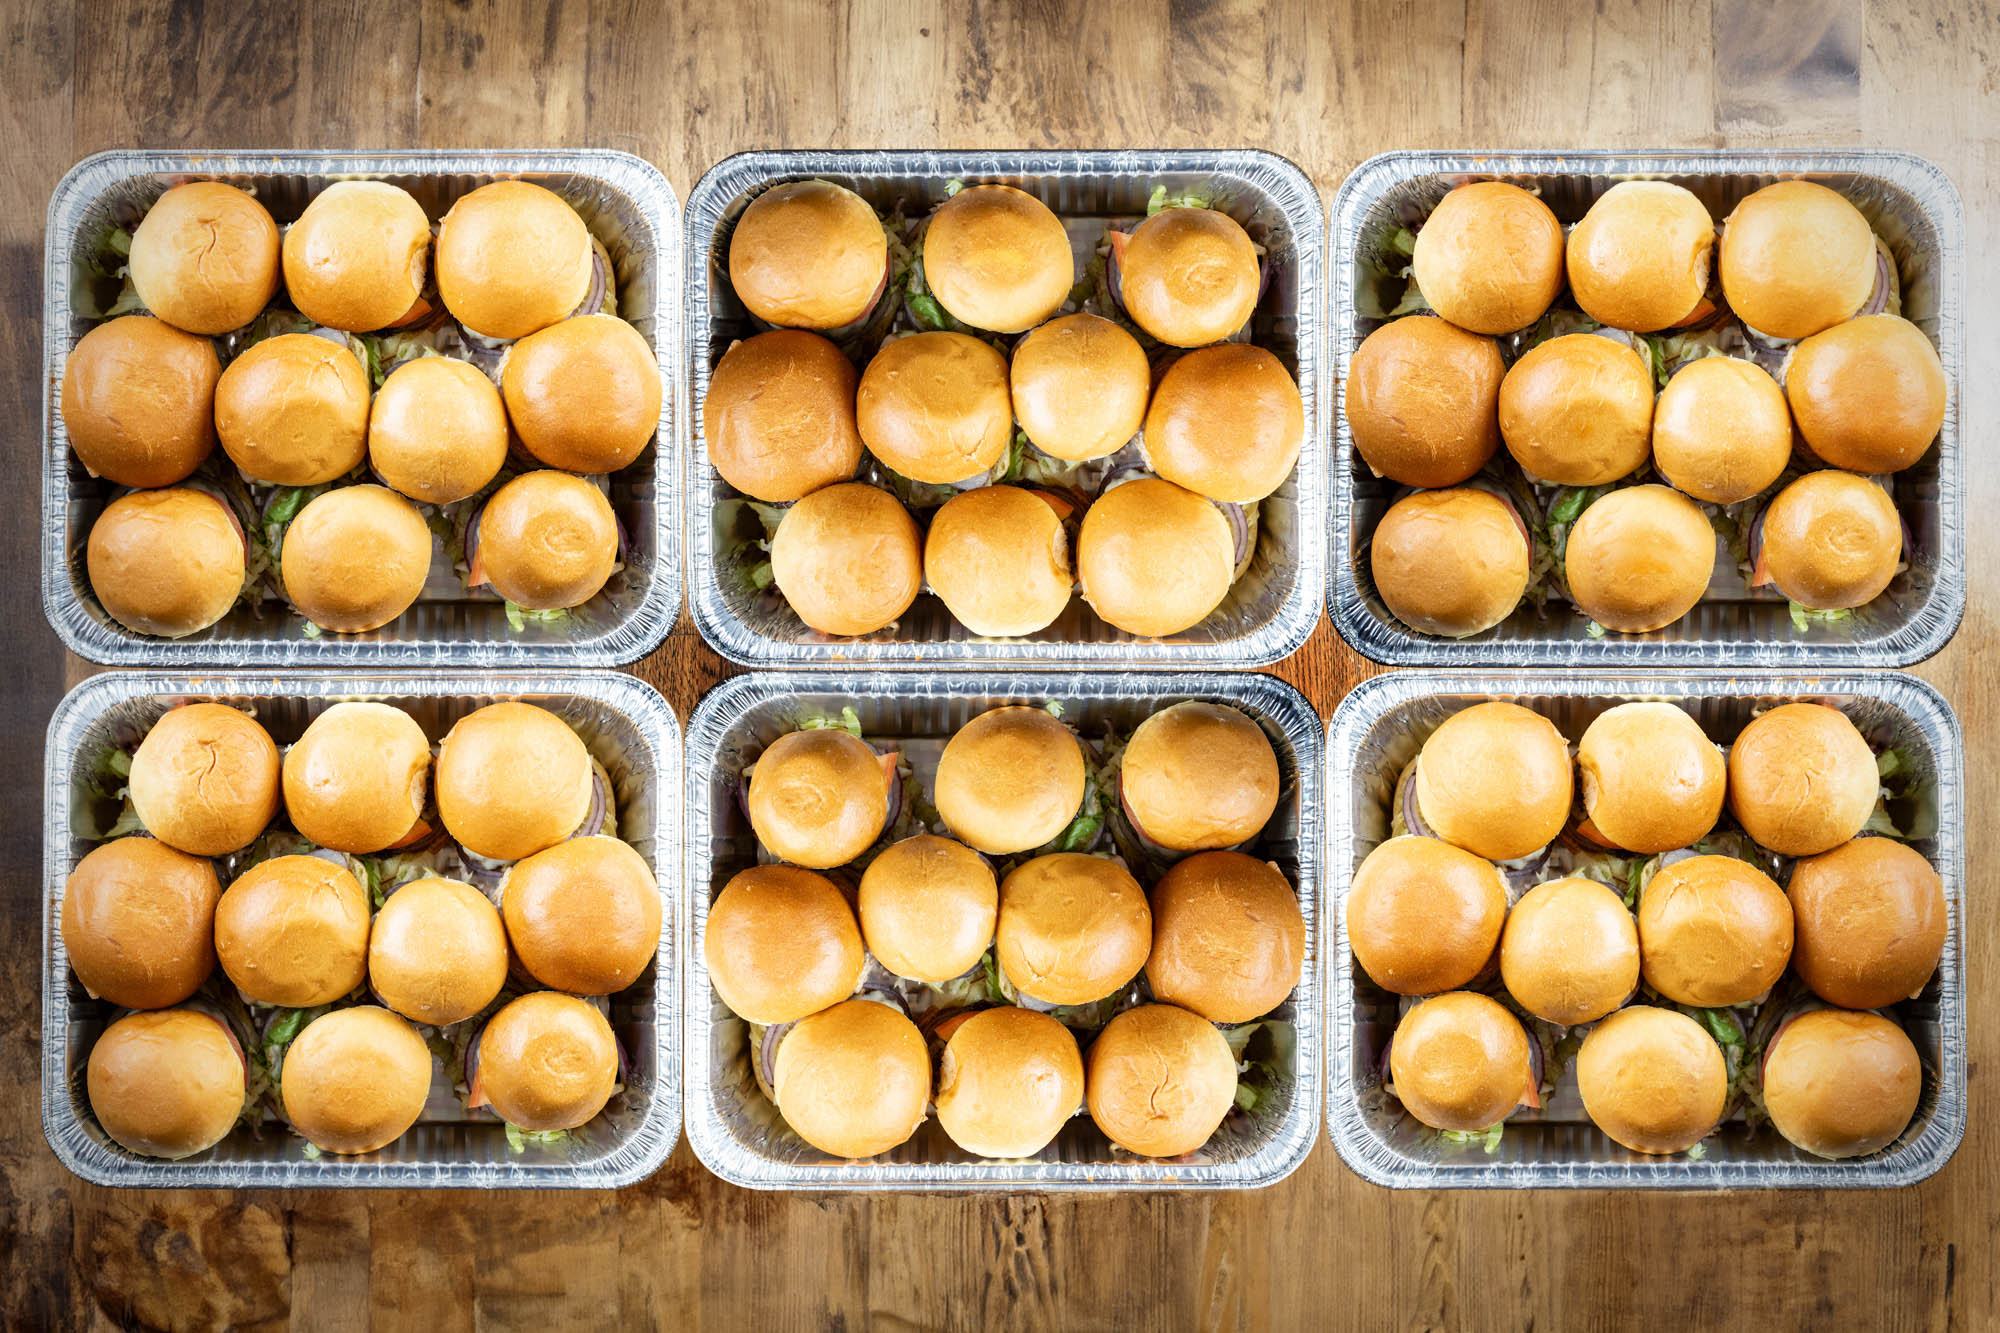 Six trays of Speedy's Burgers from our catering menu.